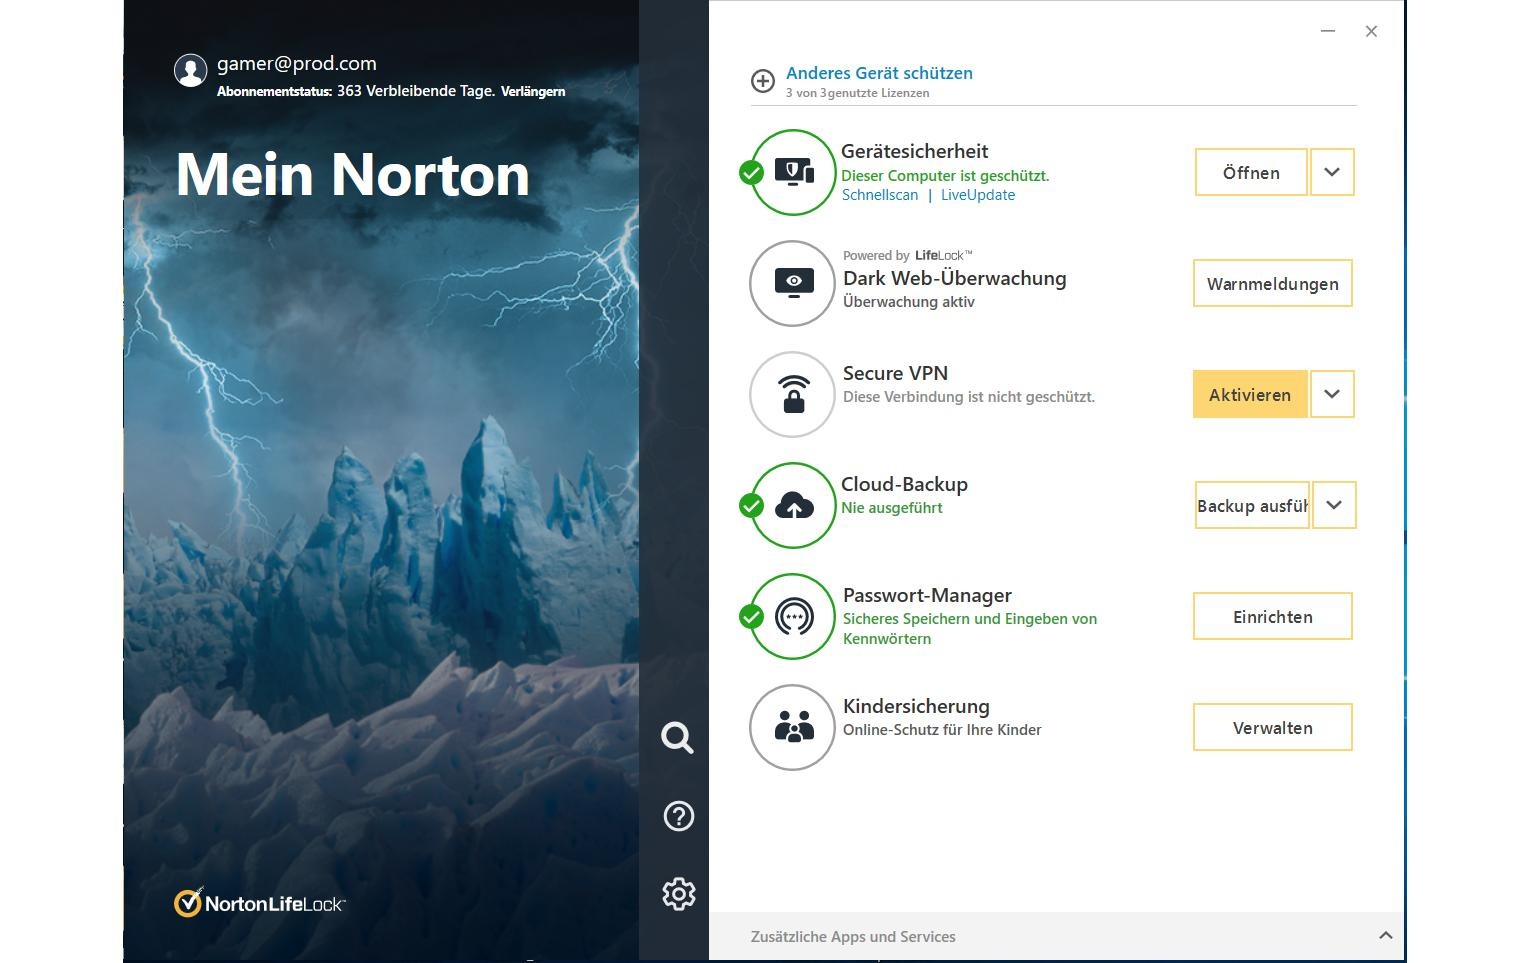 Norton Virensoftware »360 for Gamers Box, Vollvers«